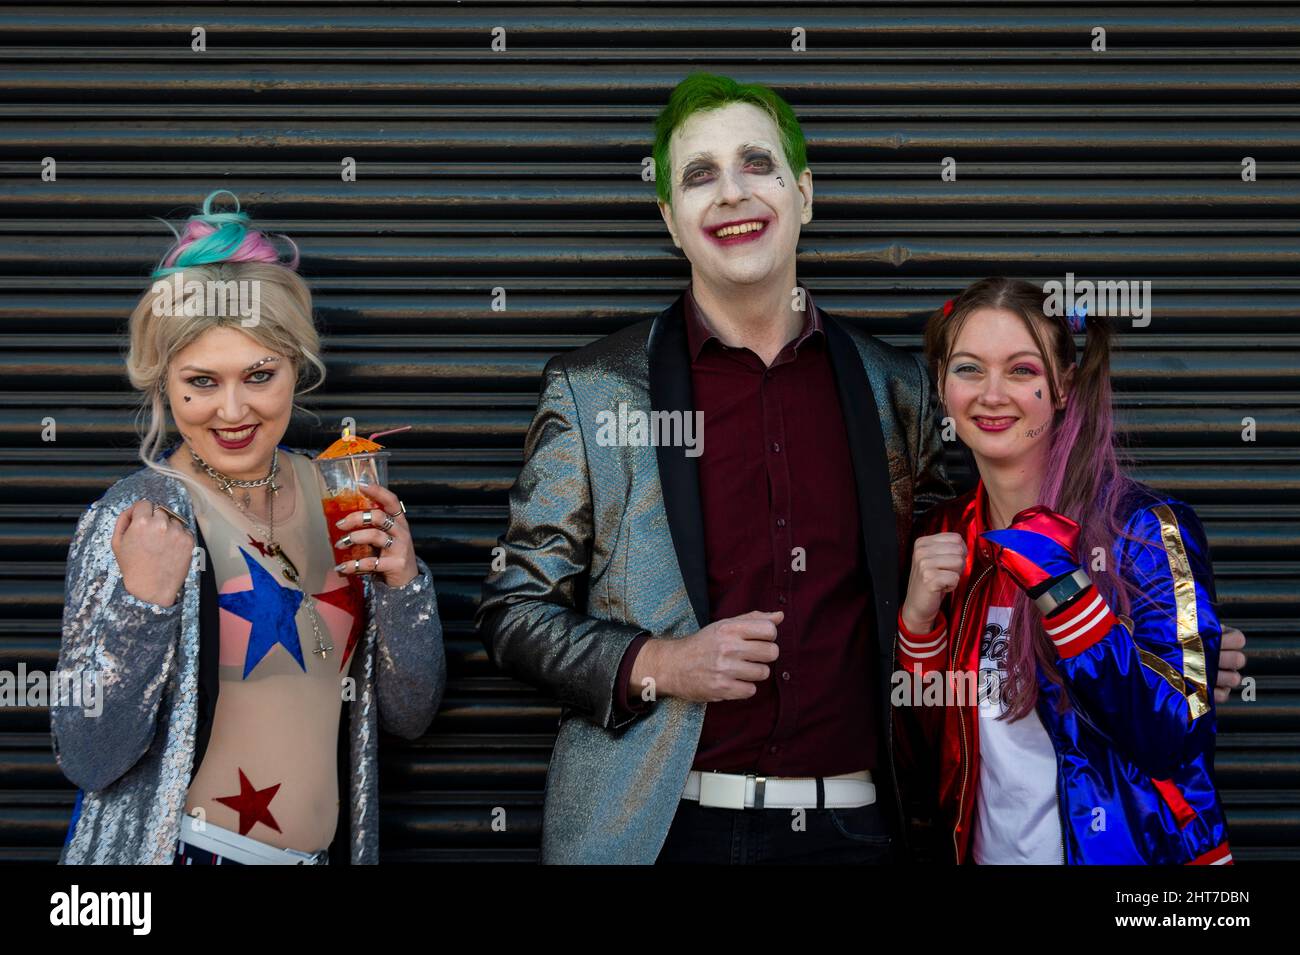 London, UK.  27 February 2022.  People dressed Harley Quinn and The Joker, DC comics characters, arrive at London Comic Con Spring held in Kensington Olympia.  The festival celebrates comics, film and TV.  Credit: Stephen Chung / Alamy Live News Stock Photo